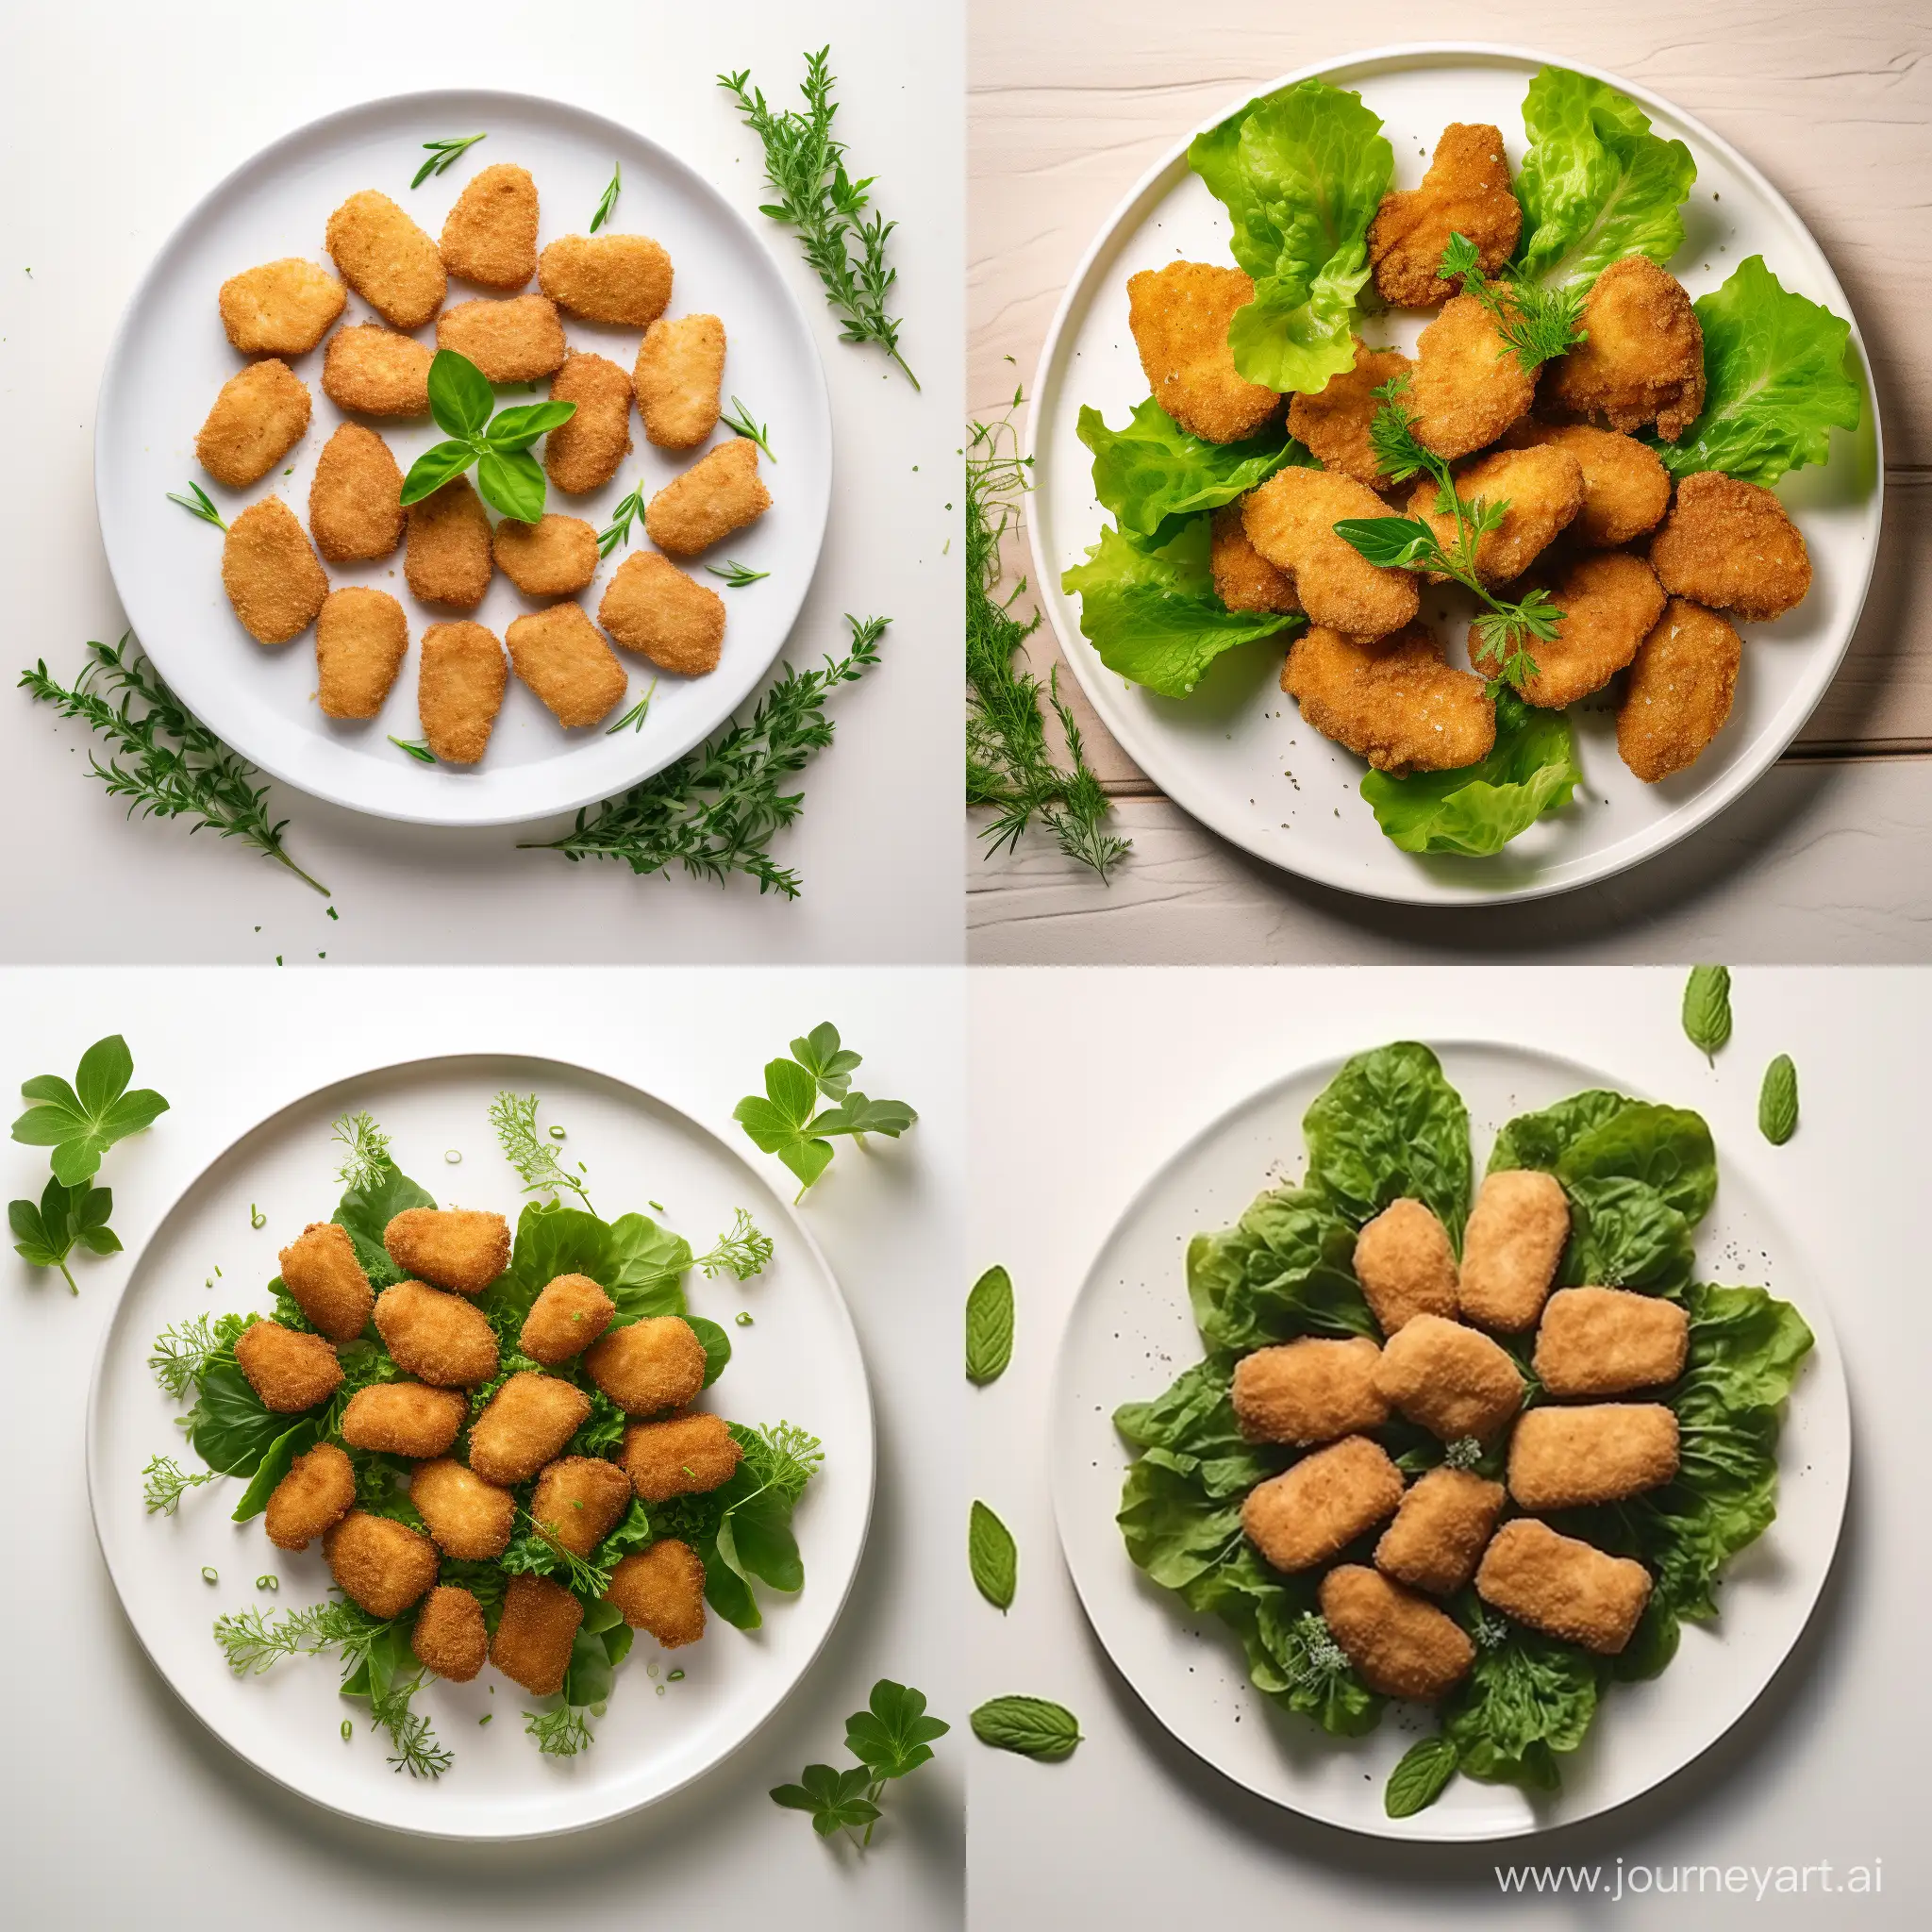 Delicious-Chicken-Nuggets-on-White-Plate-with-Fresh-Greens